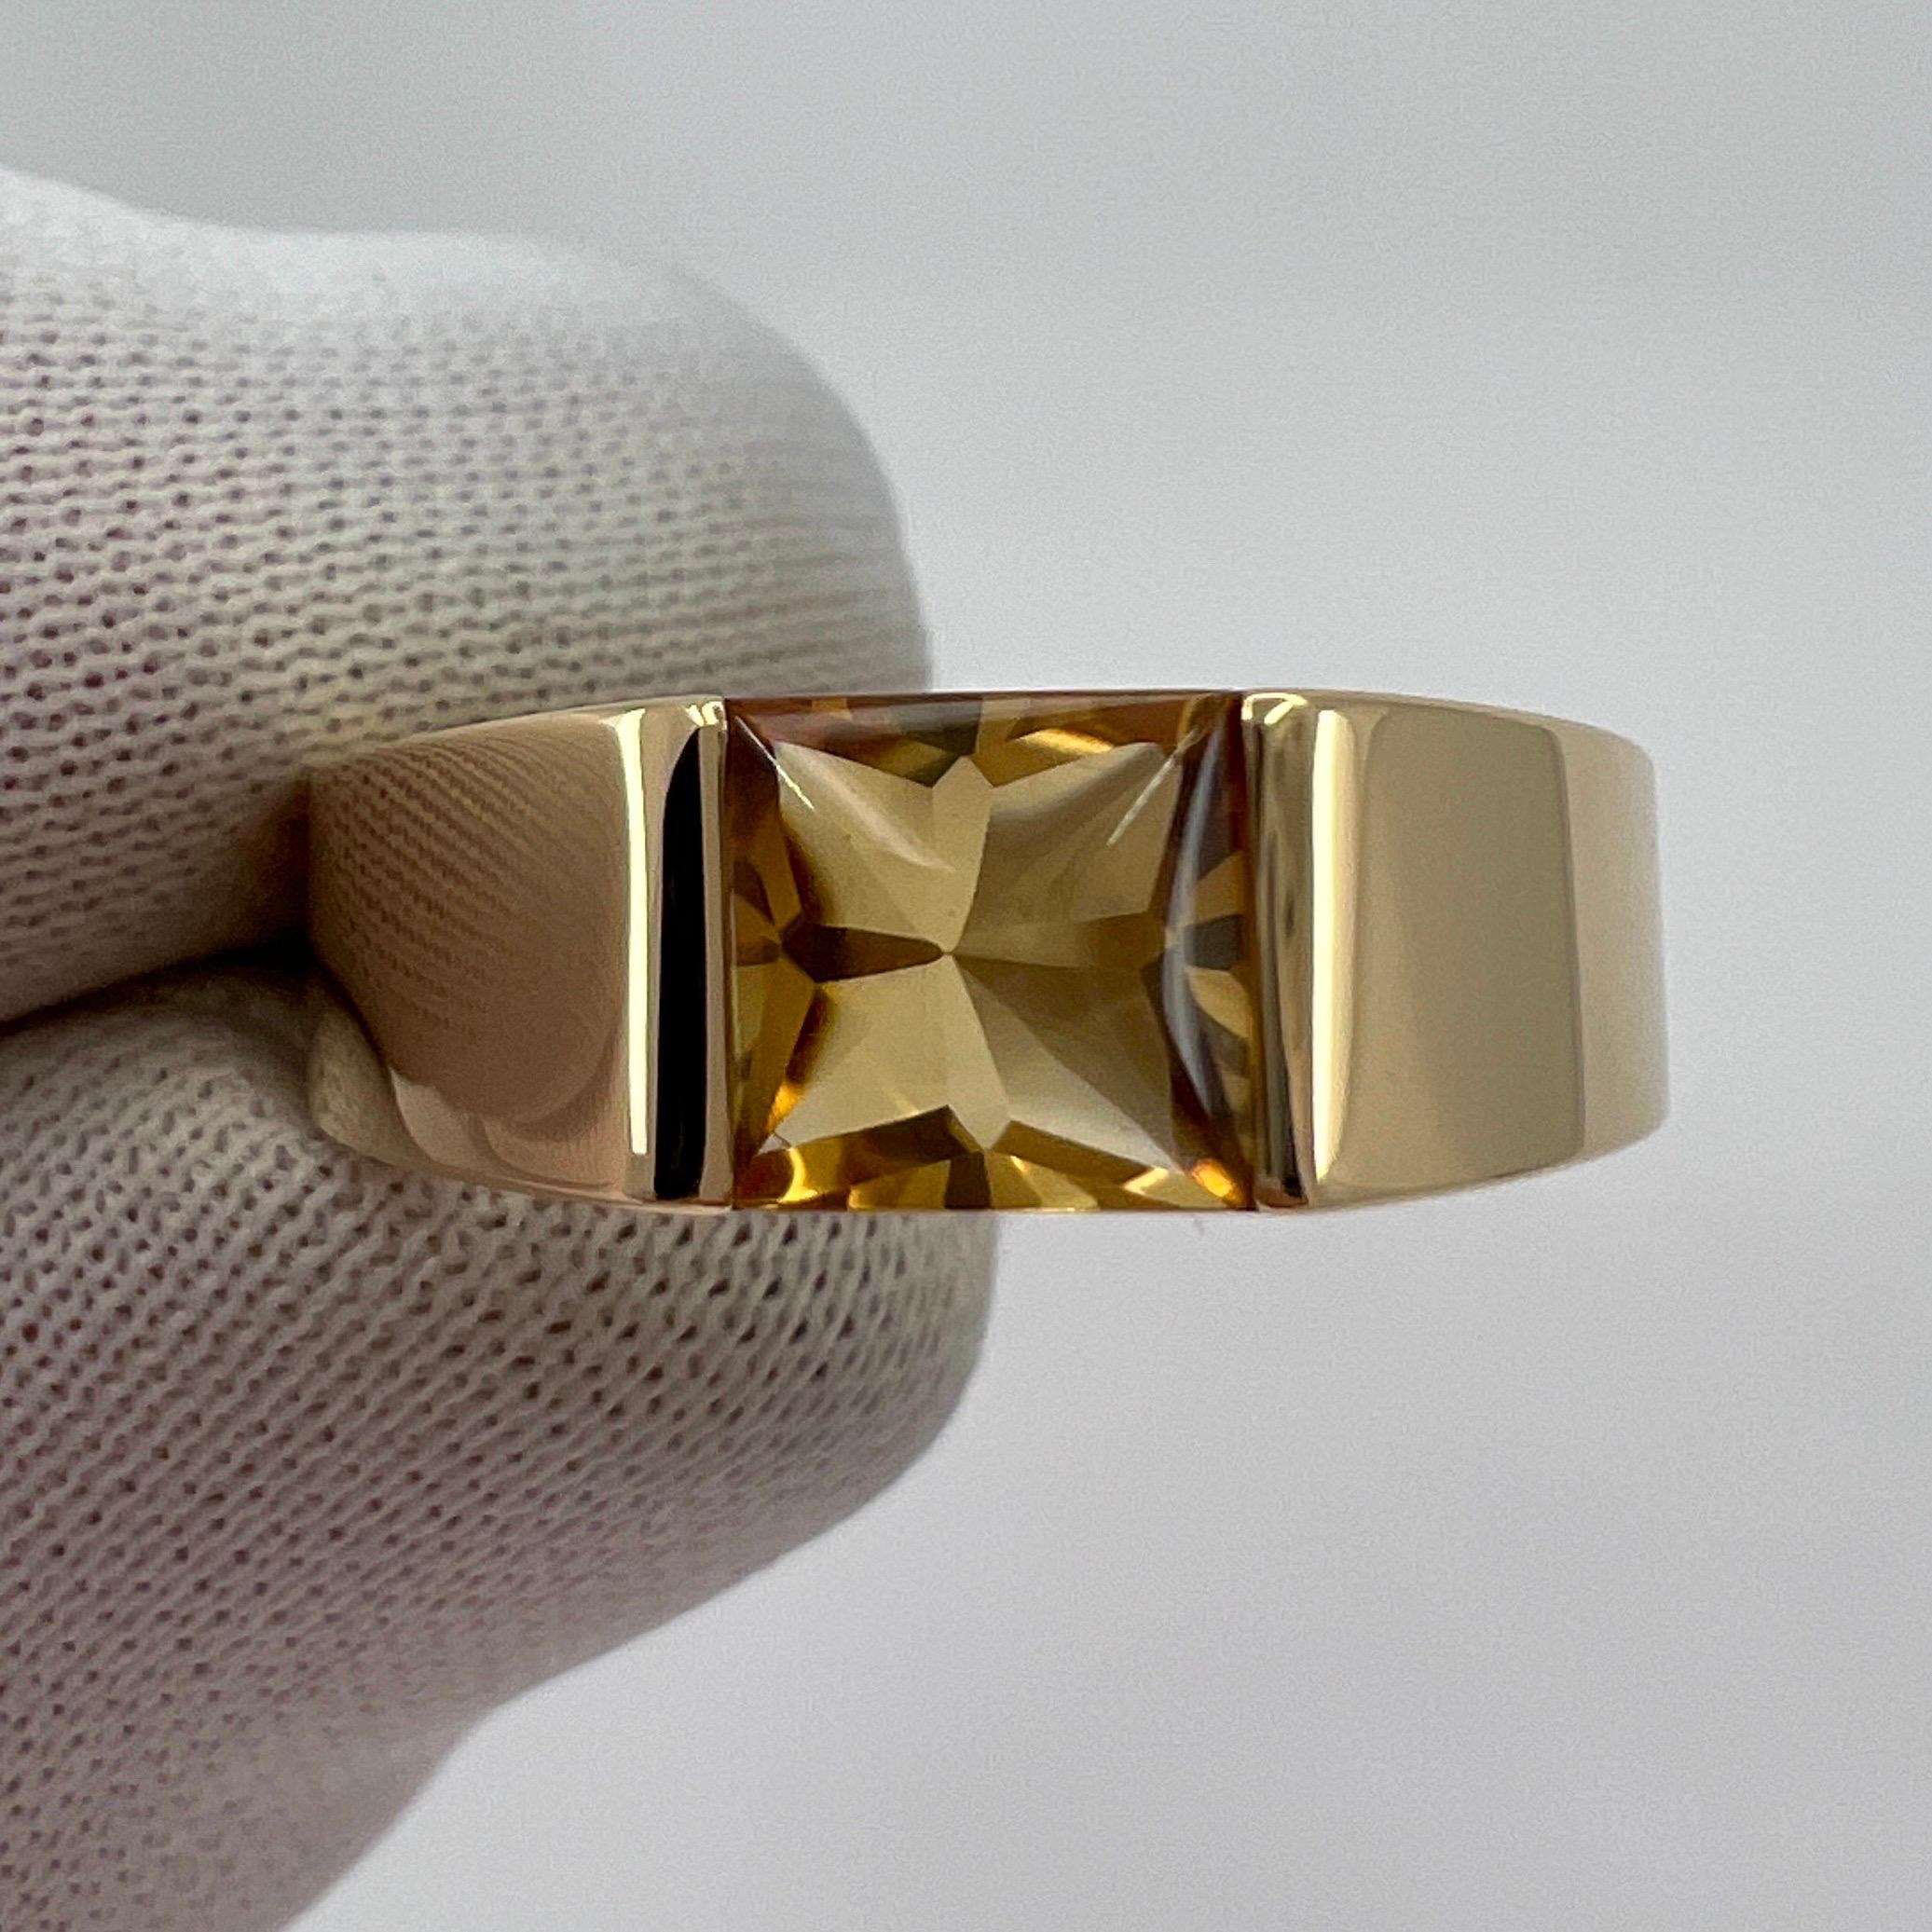 Cartier Vintage Vivid Yellow Citrine 18k Yellow Gold Tank Band Solo Ring US6 52 1